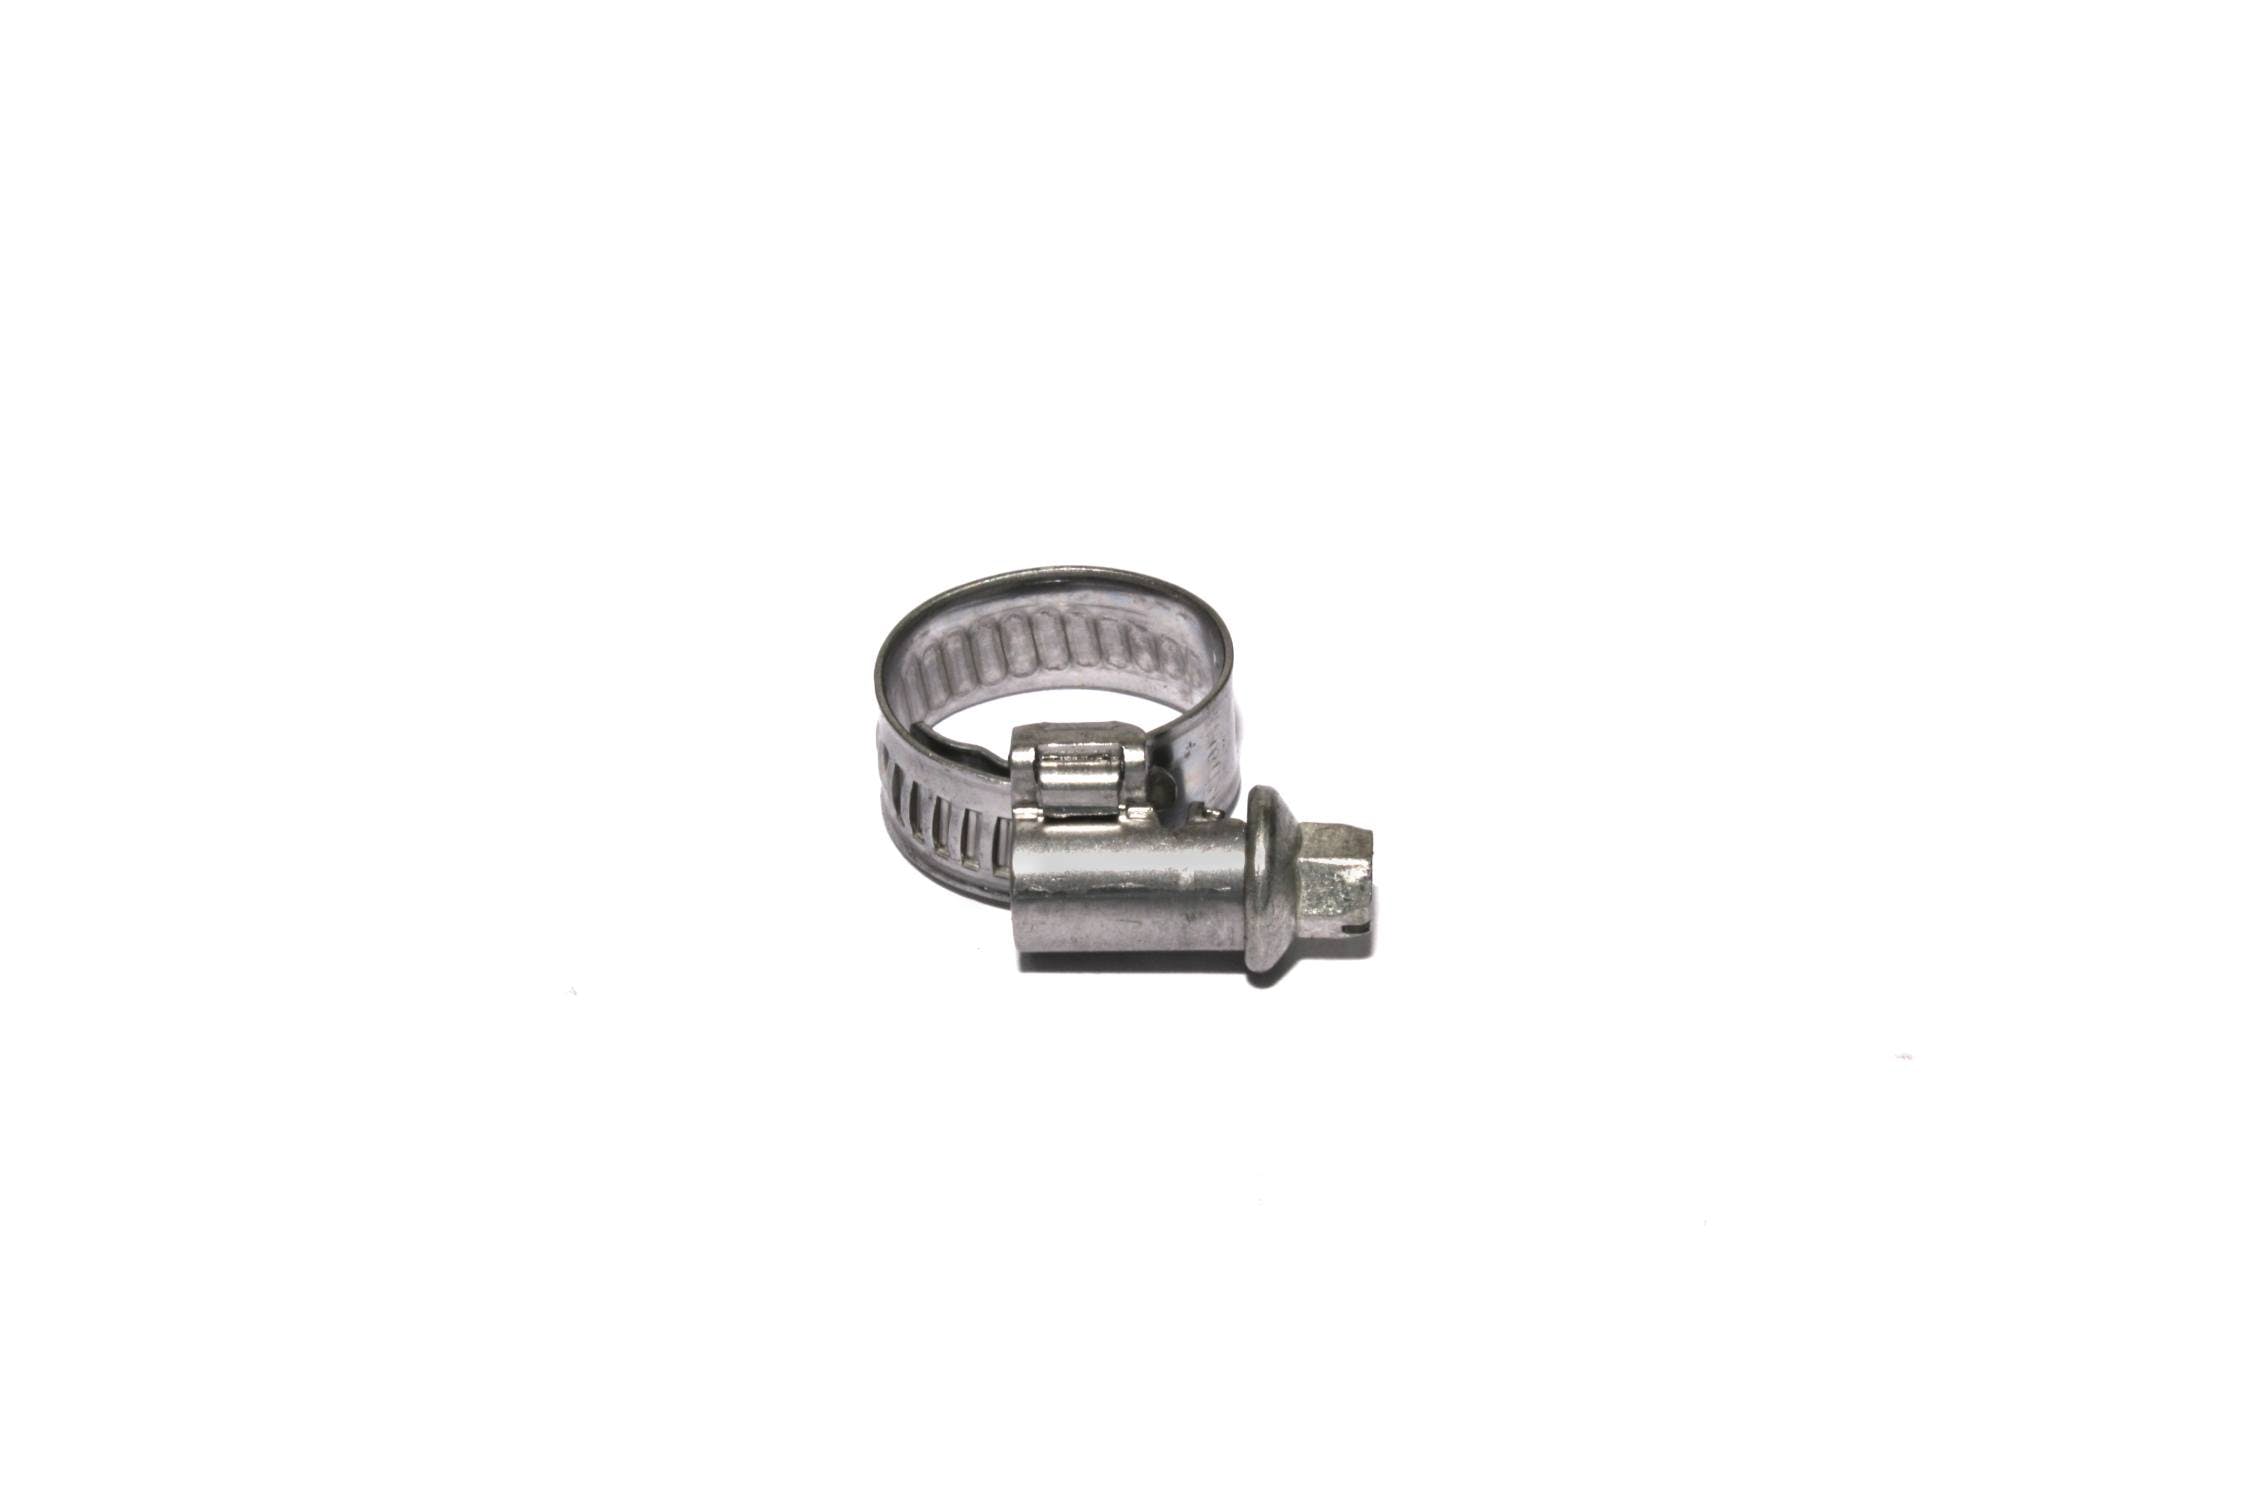 Competition Cams G3758-50 Gator Brand Performance Hose Clamps